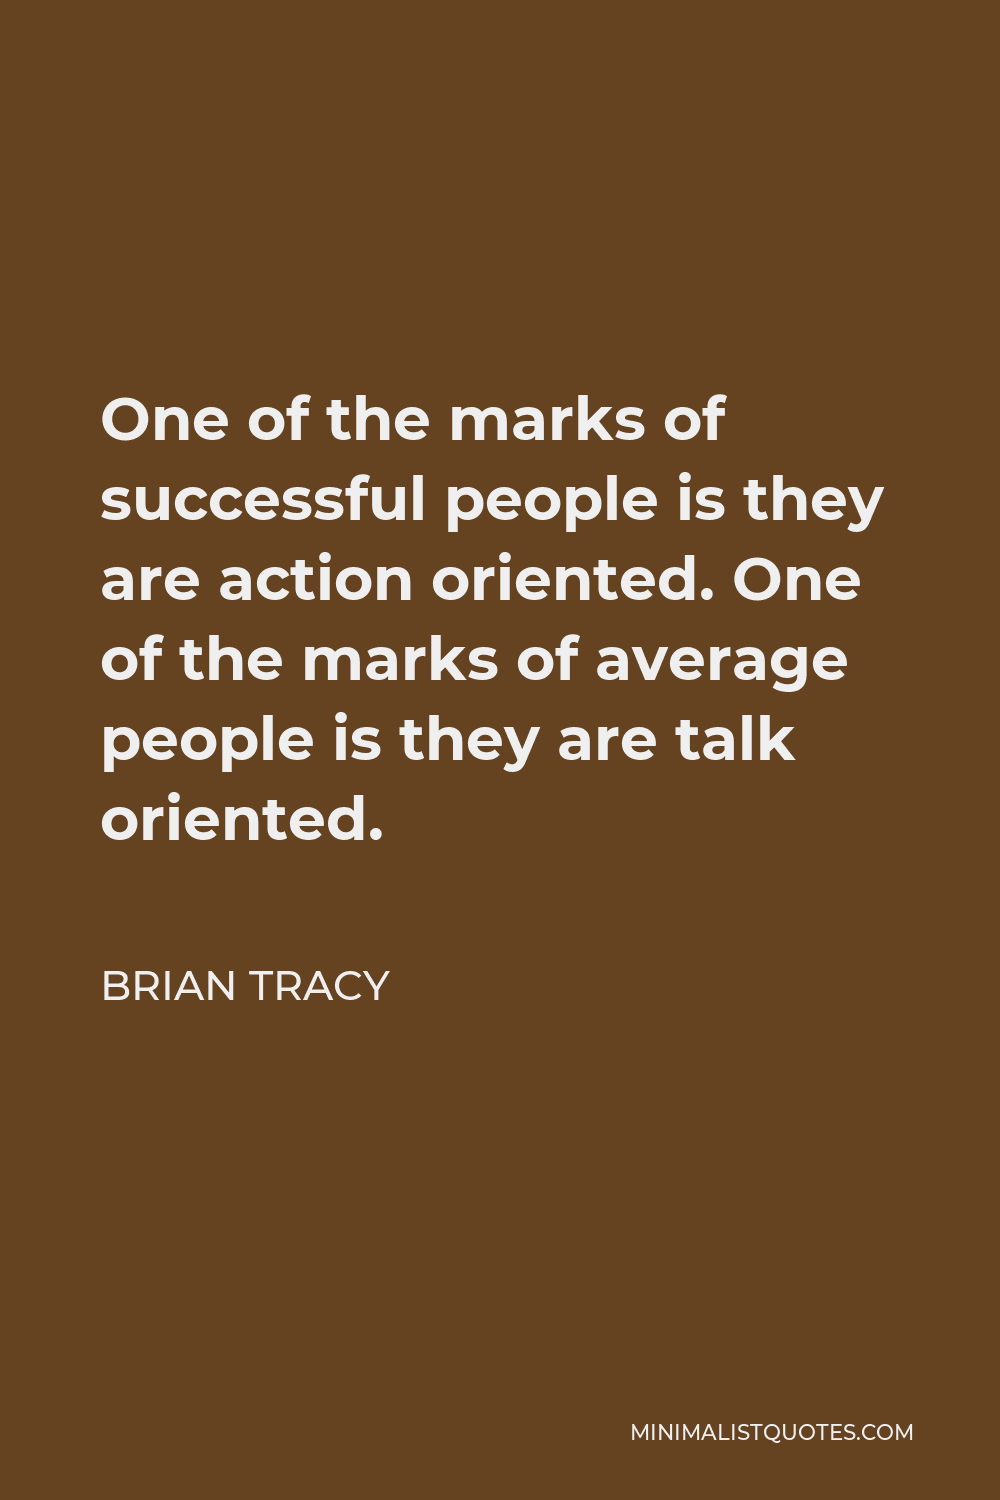 Brian Tracy Quote - One of the marks of successful people is they are action oriented. One of the marks of average people is they are talk oriented.